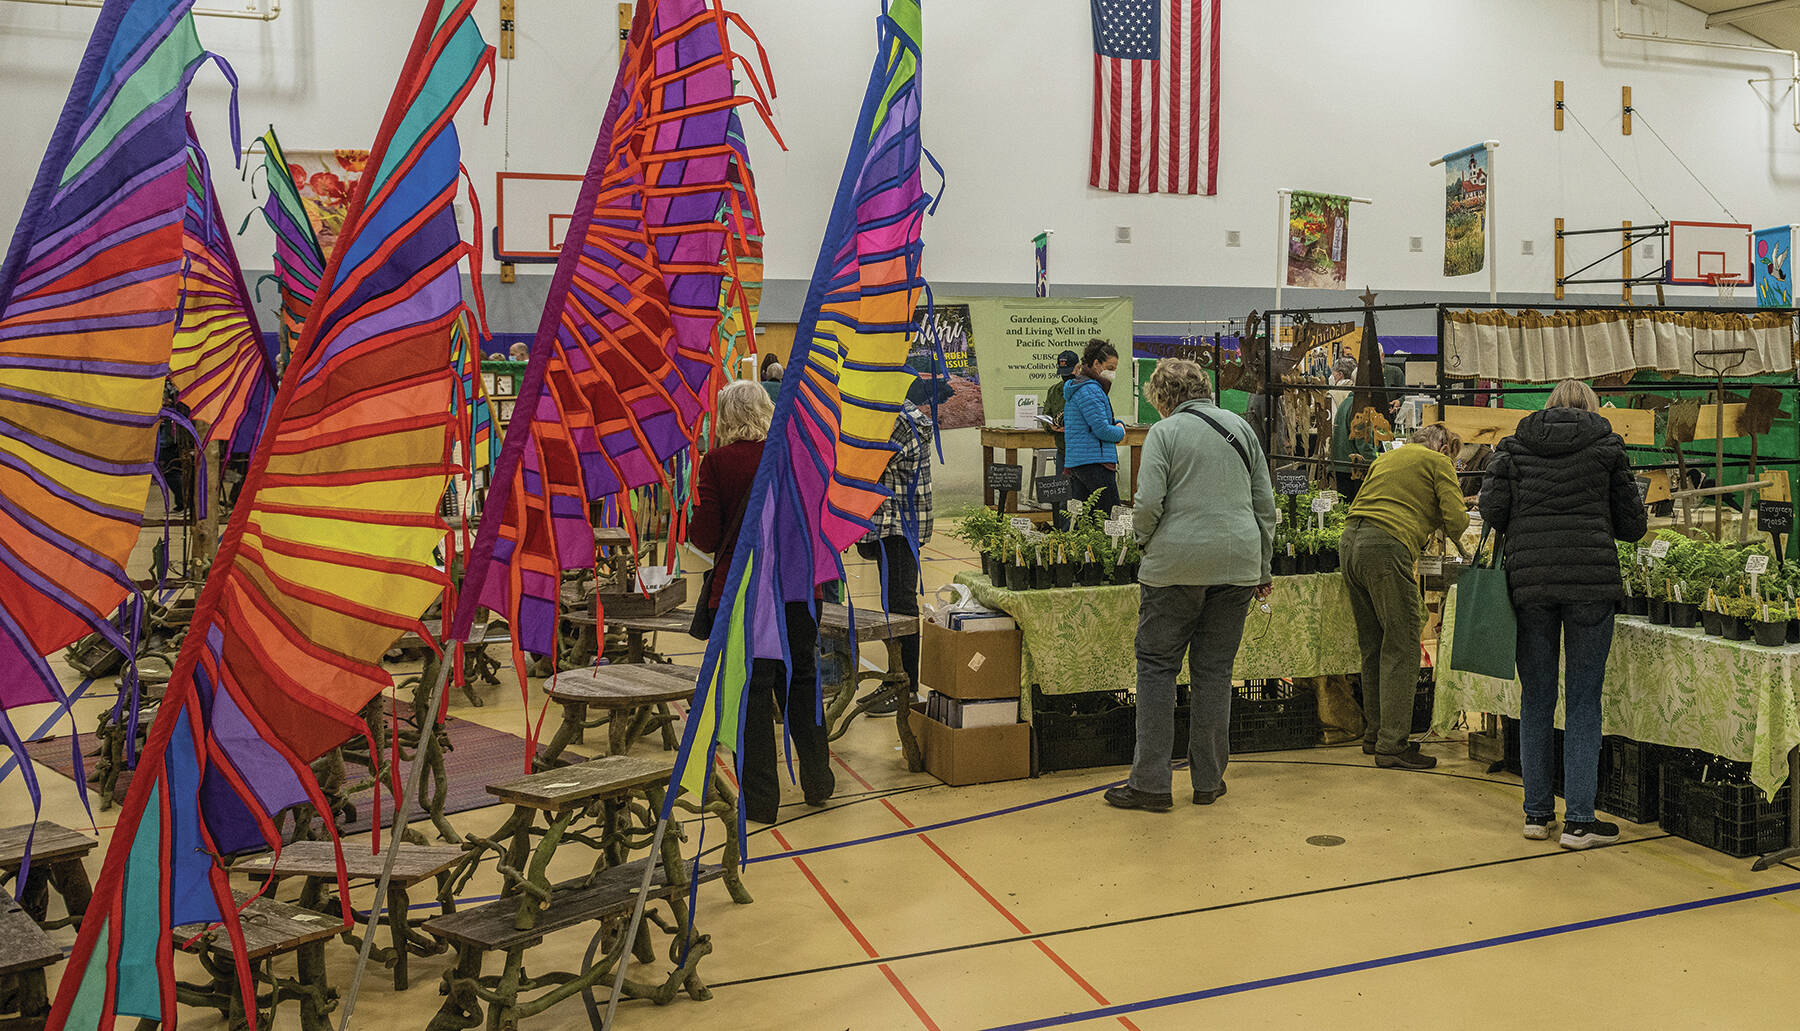 The marketplace, held during the workshop, is a popular place to find all sorts of items. (Photo provided)